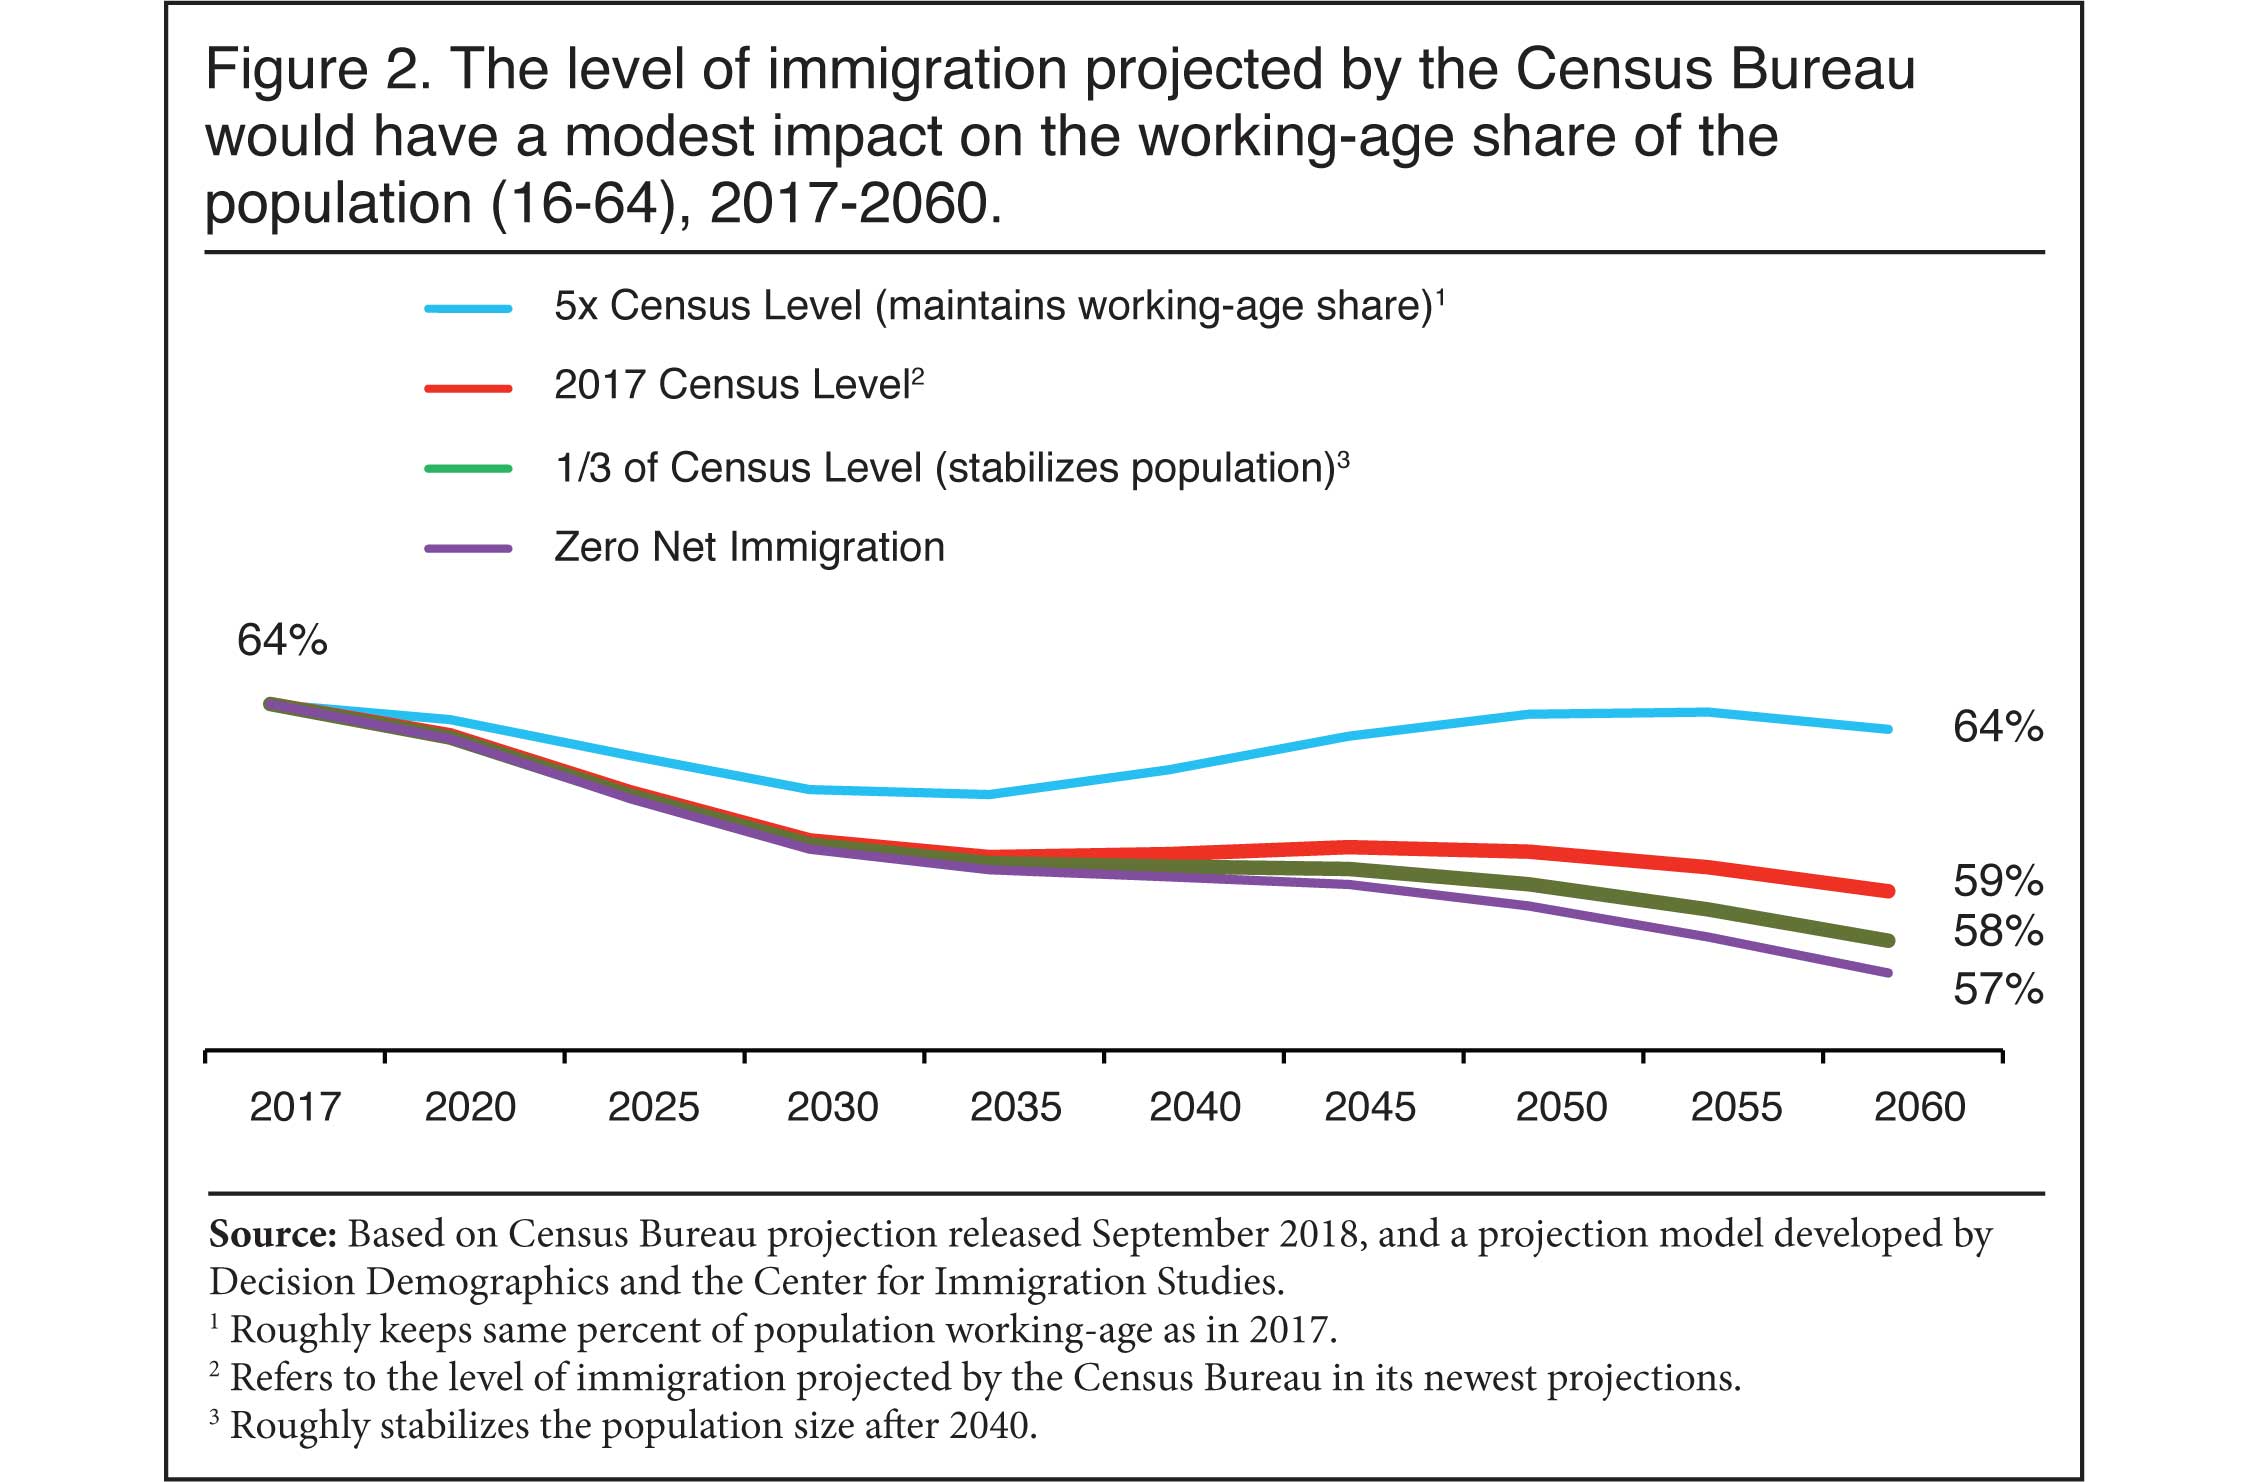 Graph: The Level of Immigration Projected by the Census Bureau Would Have a Modest Impact on the Working Age Share of the Population